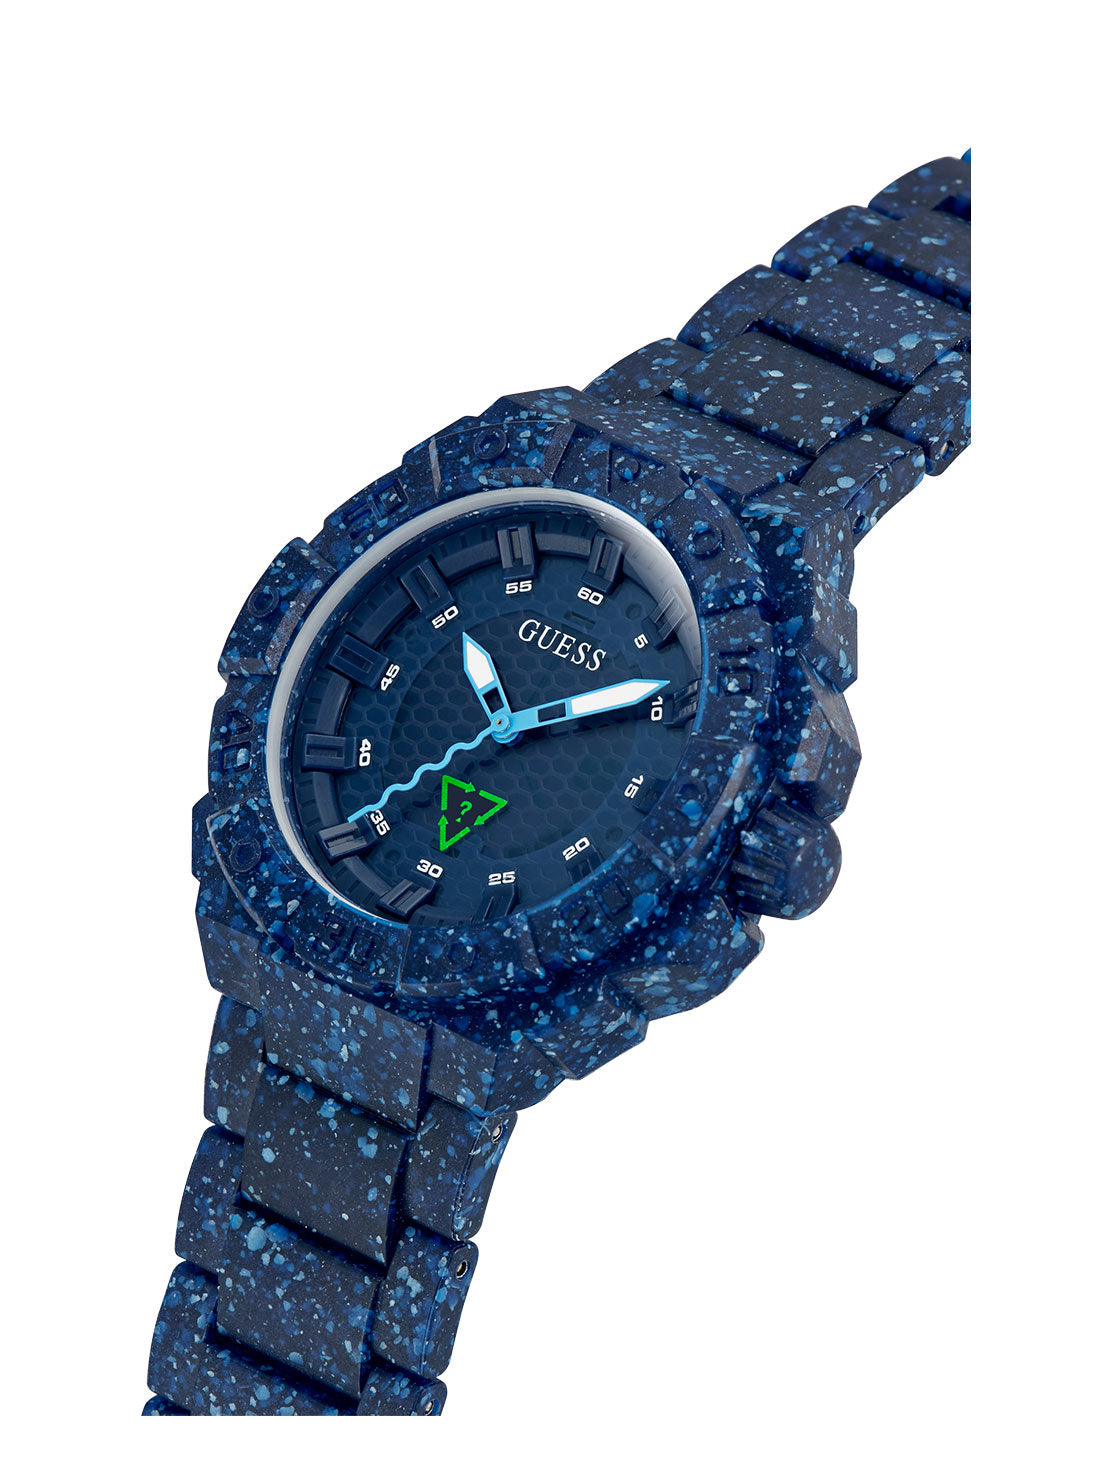 GUESS Women's Blue Pacific Oceans Watch GW0507G1 Angle View